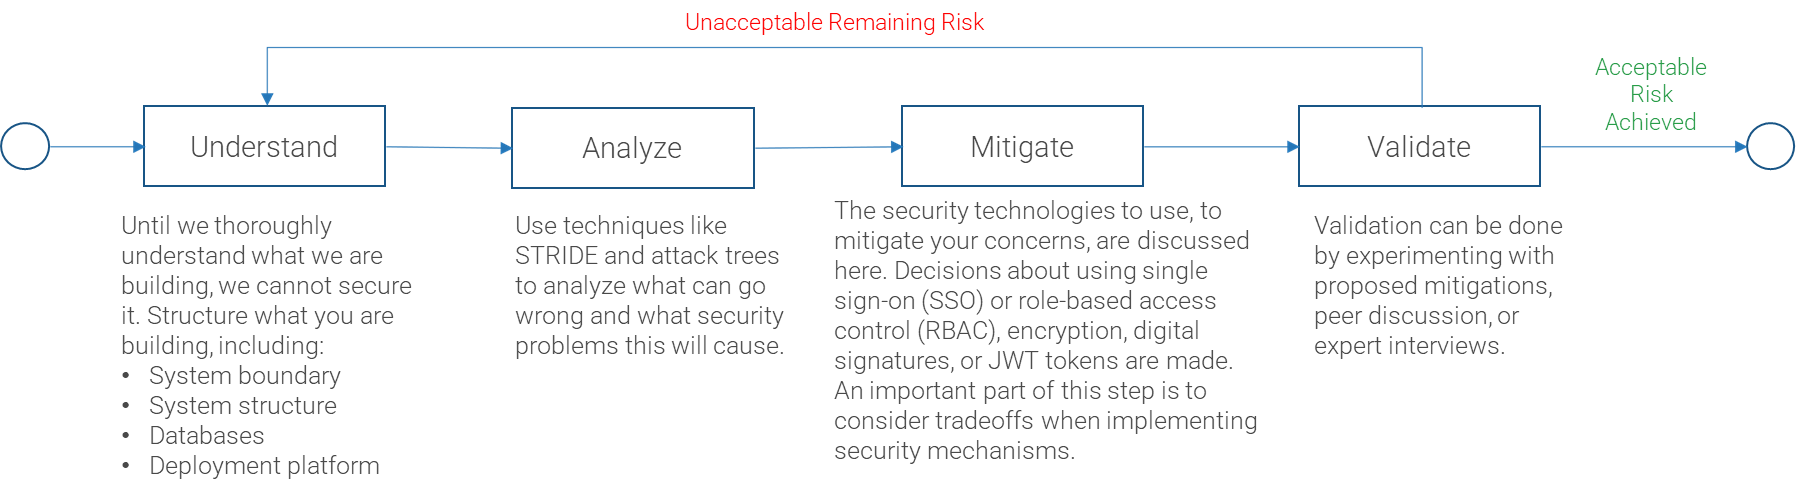 This image contains a sample threat and risk assessment. The steps are Understand: Until we thoroughly understand what we are building, we cannot secure it. Structure what you are building, including: System boundary, System structure, Databases, Deployment platform; Analyze: Use techniques like STRIDE and attack trees to analyze what can go wrong and what security problems this will cause; Mitigate: The security technologies to use, to mitigate your concerns, are discussed here. Decisions about using single sign-on (SSO) or role-based access control (RBAC), encryption, digital signatures, or JWT tokens are made. An important part of this step is to consider tradeoffs when implementing security mechanisms; validate: Validation can be done by experimenting with proposed mitigations, peer discussion, or expert interviews.